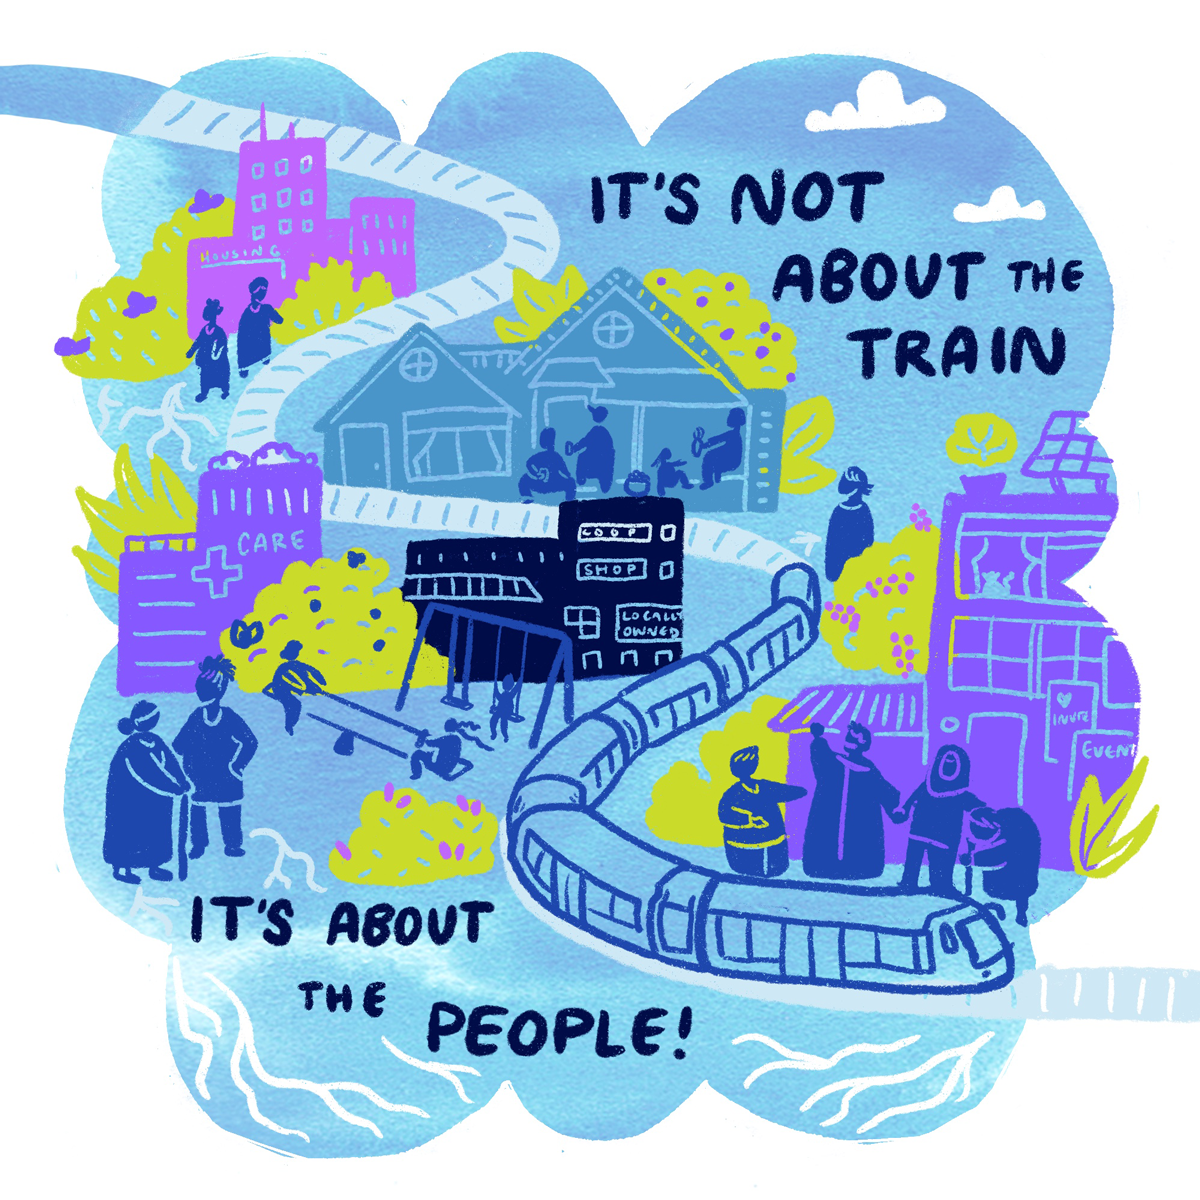 It's not about the train, it's about the people!